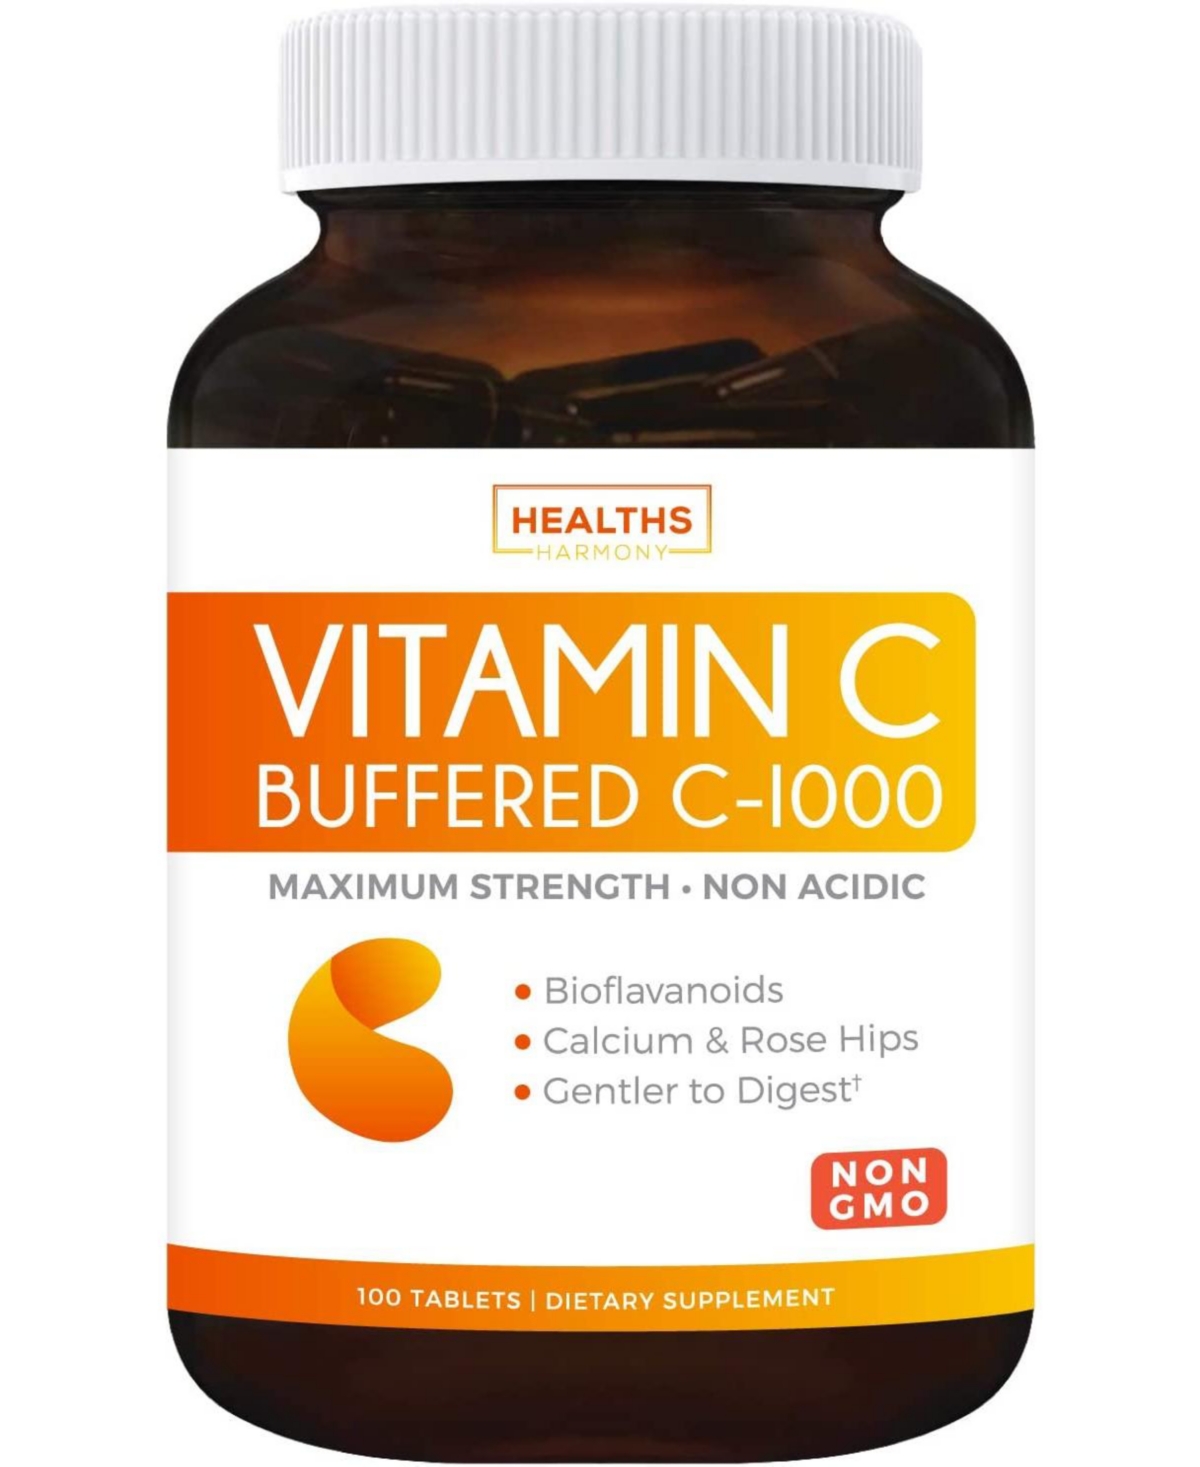 Buffered Vitamin C 1000mg Tablets (Non-gmo) Immune Support Supplement with Vit C, Citrus Bioflavonoids, Calcium Ascorbate and Rose Hips